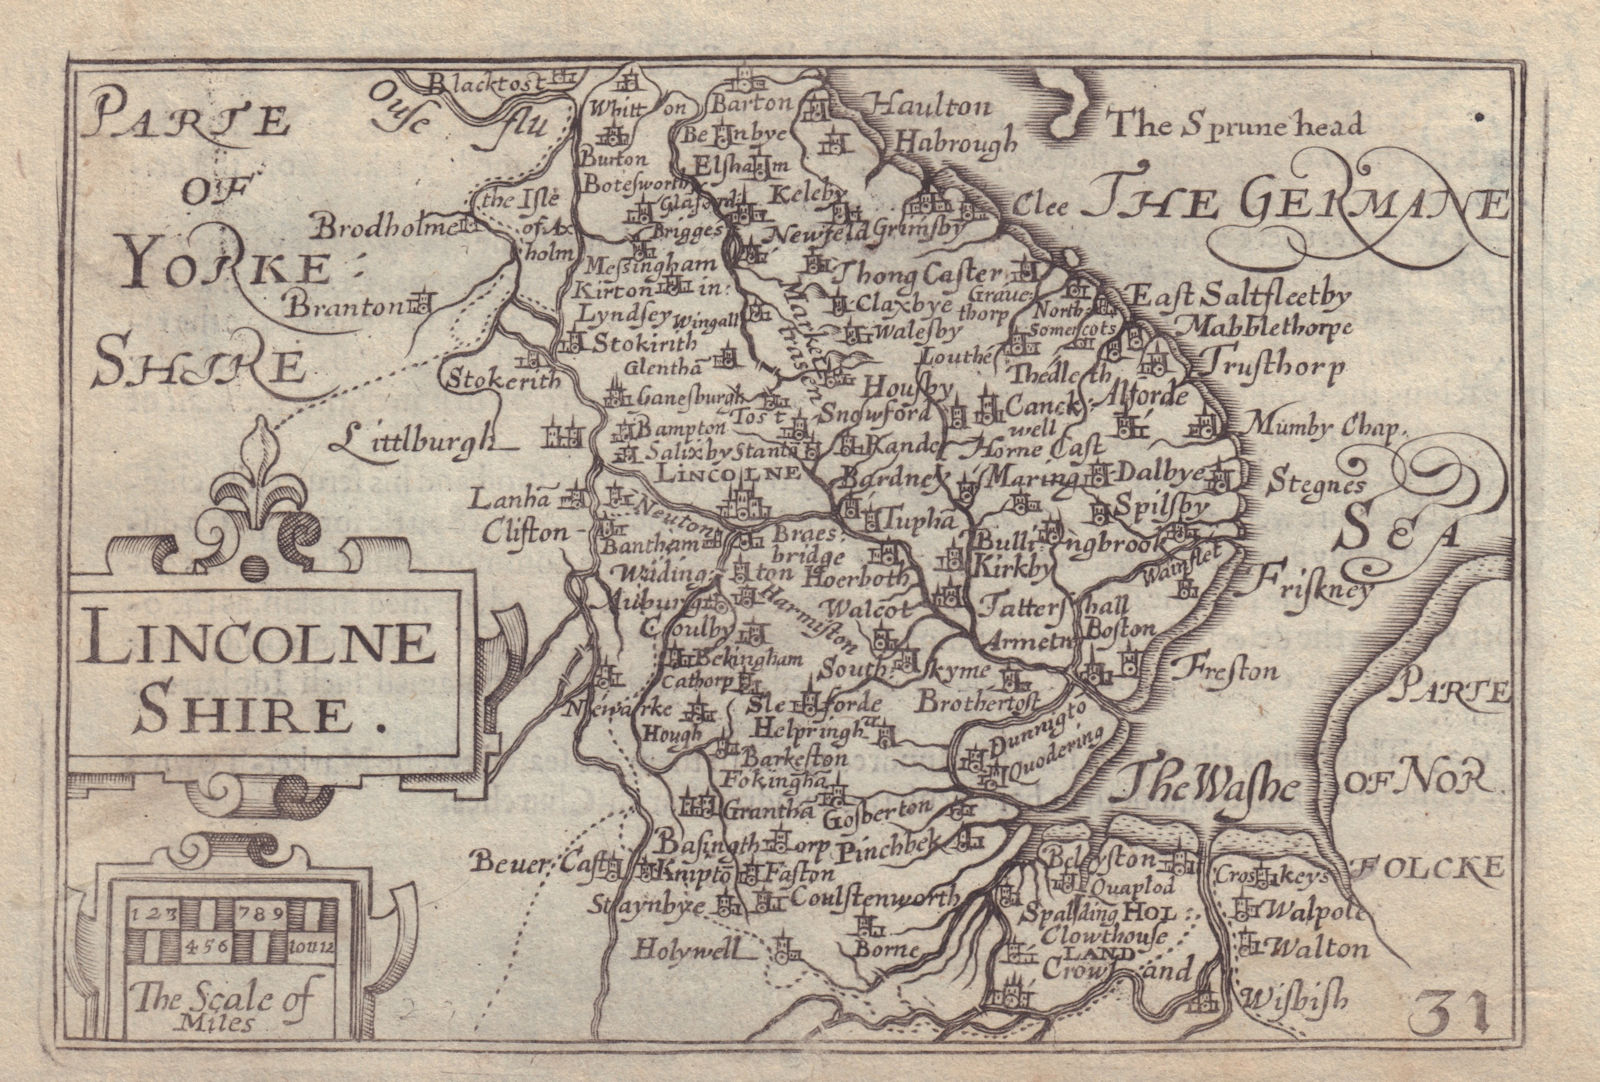 Associate Product Lincolne Shire by van den Keere. "Speed miniature" Lincolnshire county map 1632